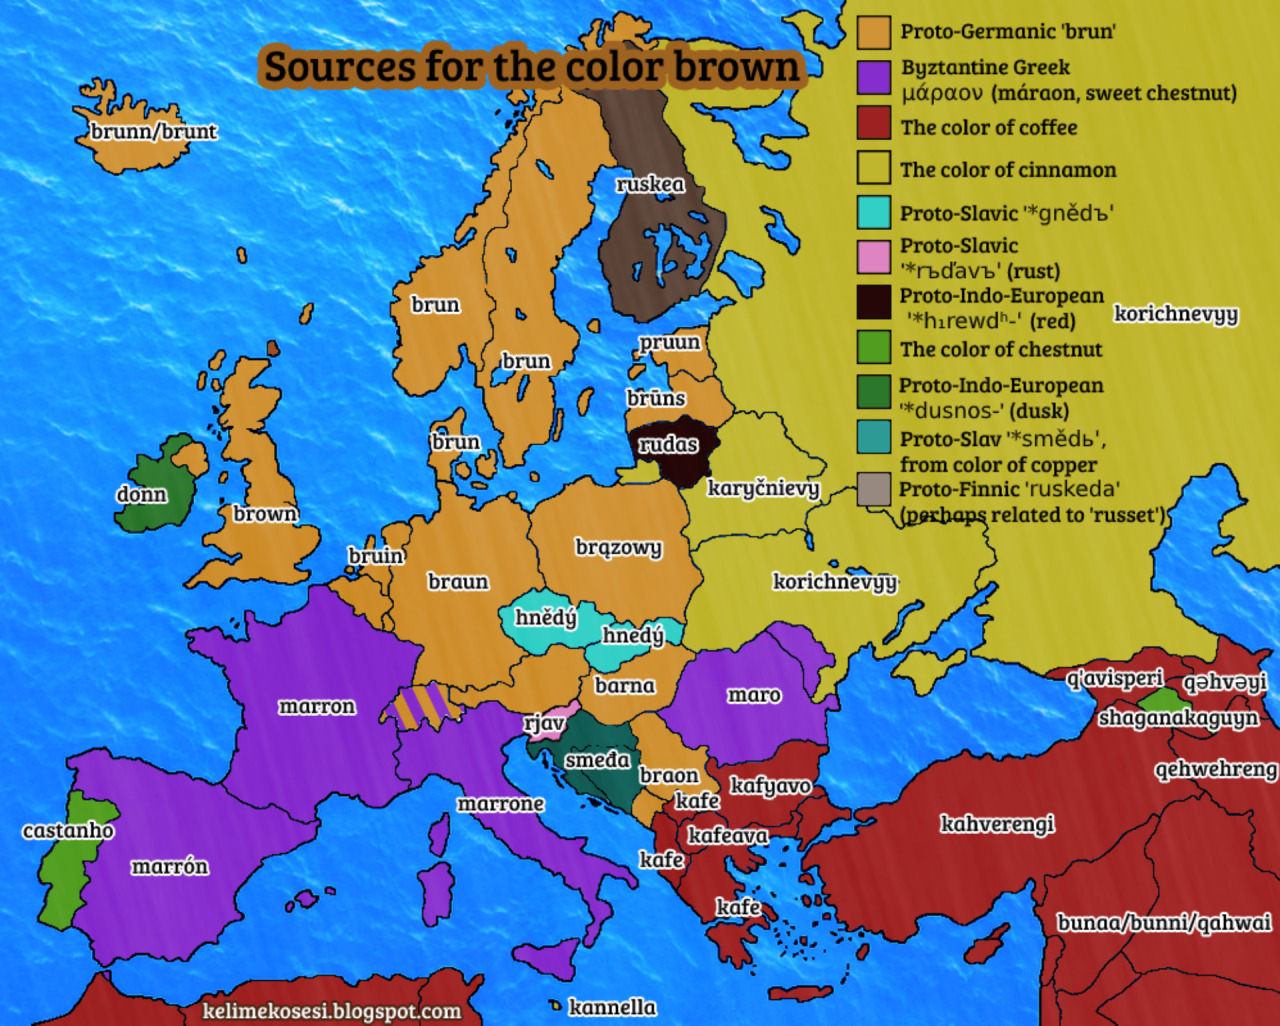 arrozbrillante:
“jagoandlitefoot:
“mapsontheweb:
“Where the word for the color “brown” comes from in each language.
by u/Lebl4t
Keep reading
” ”
in spain you say castaño too!
”